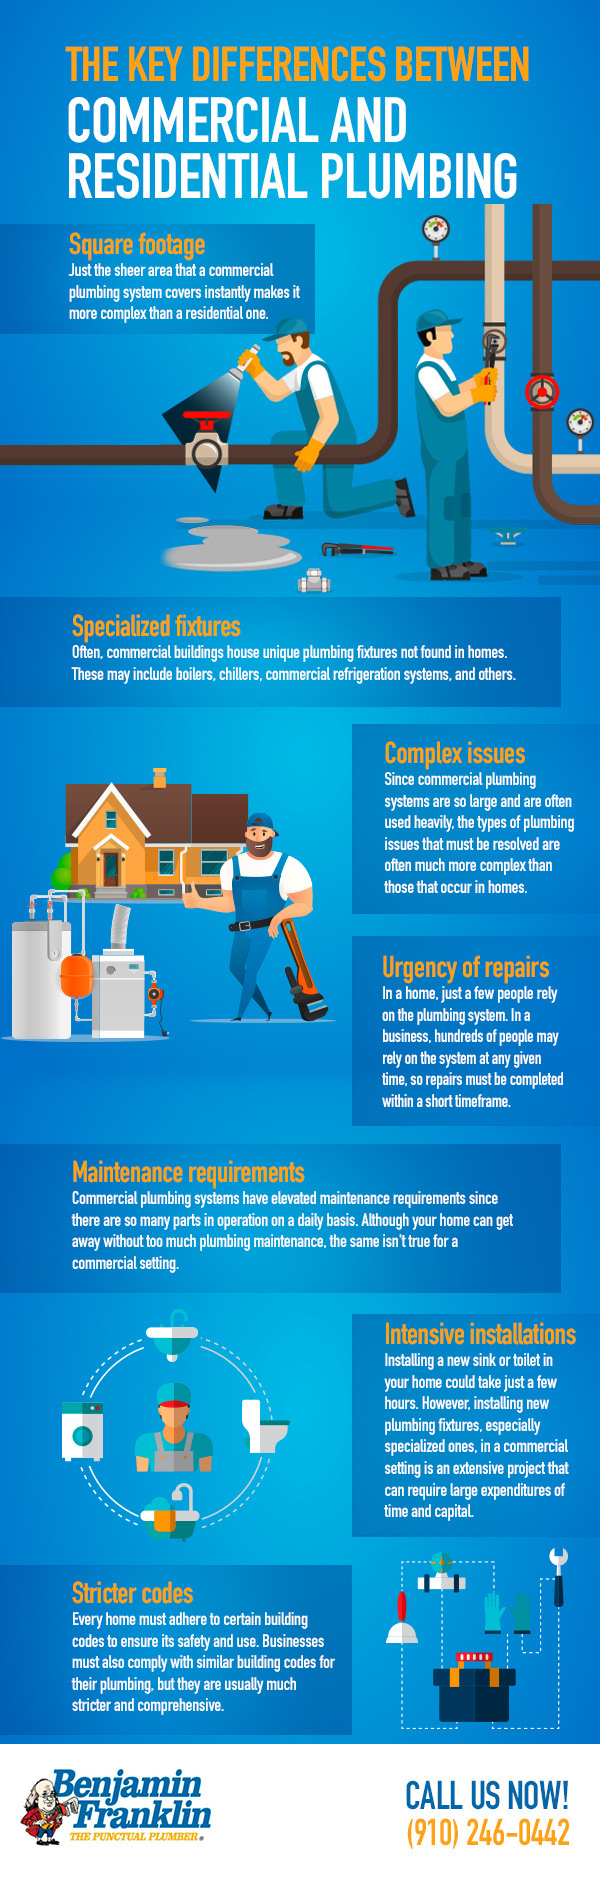 The Key Differences Between Commercial and Residential Plumbing [infographic]